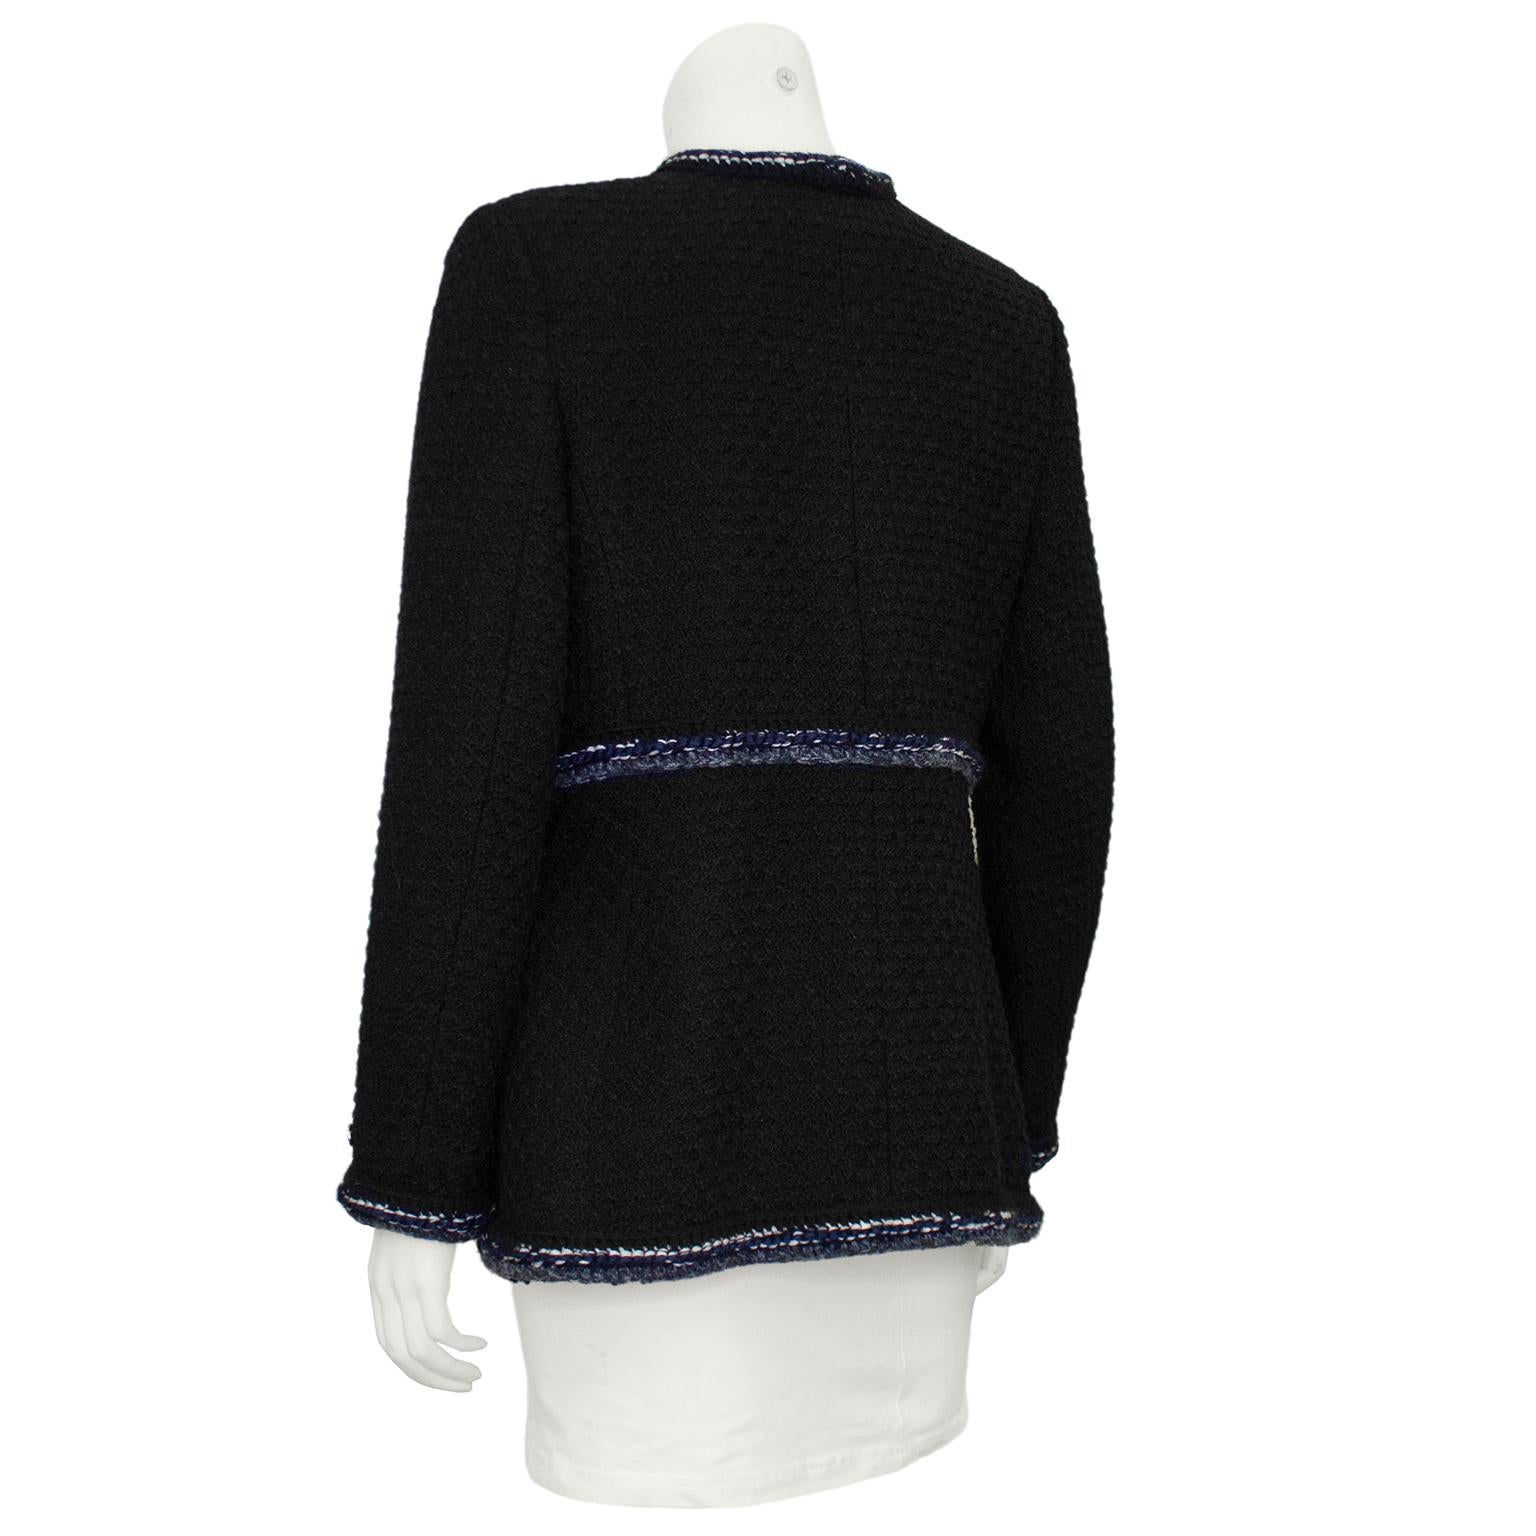 2010s Chanel Black Boucle Jacket In Good Condition For Sale In Toronto, Ontario